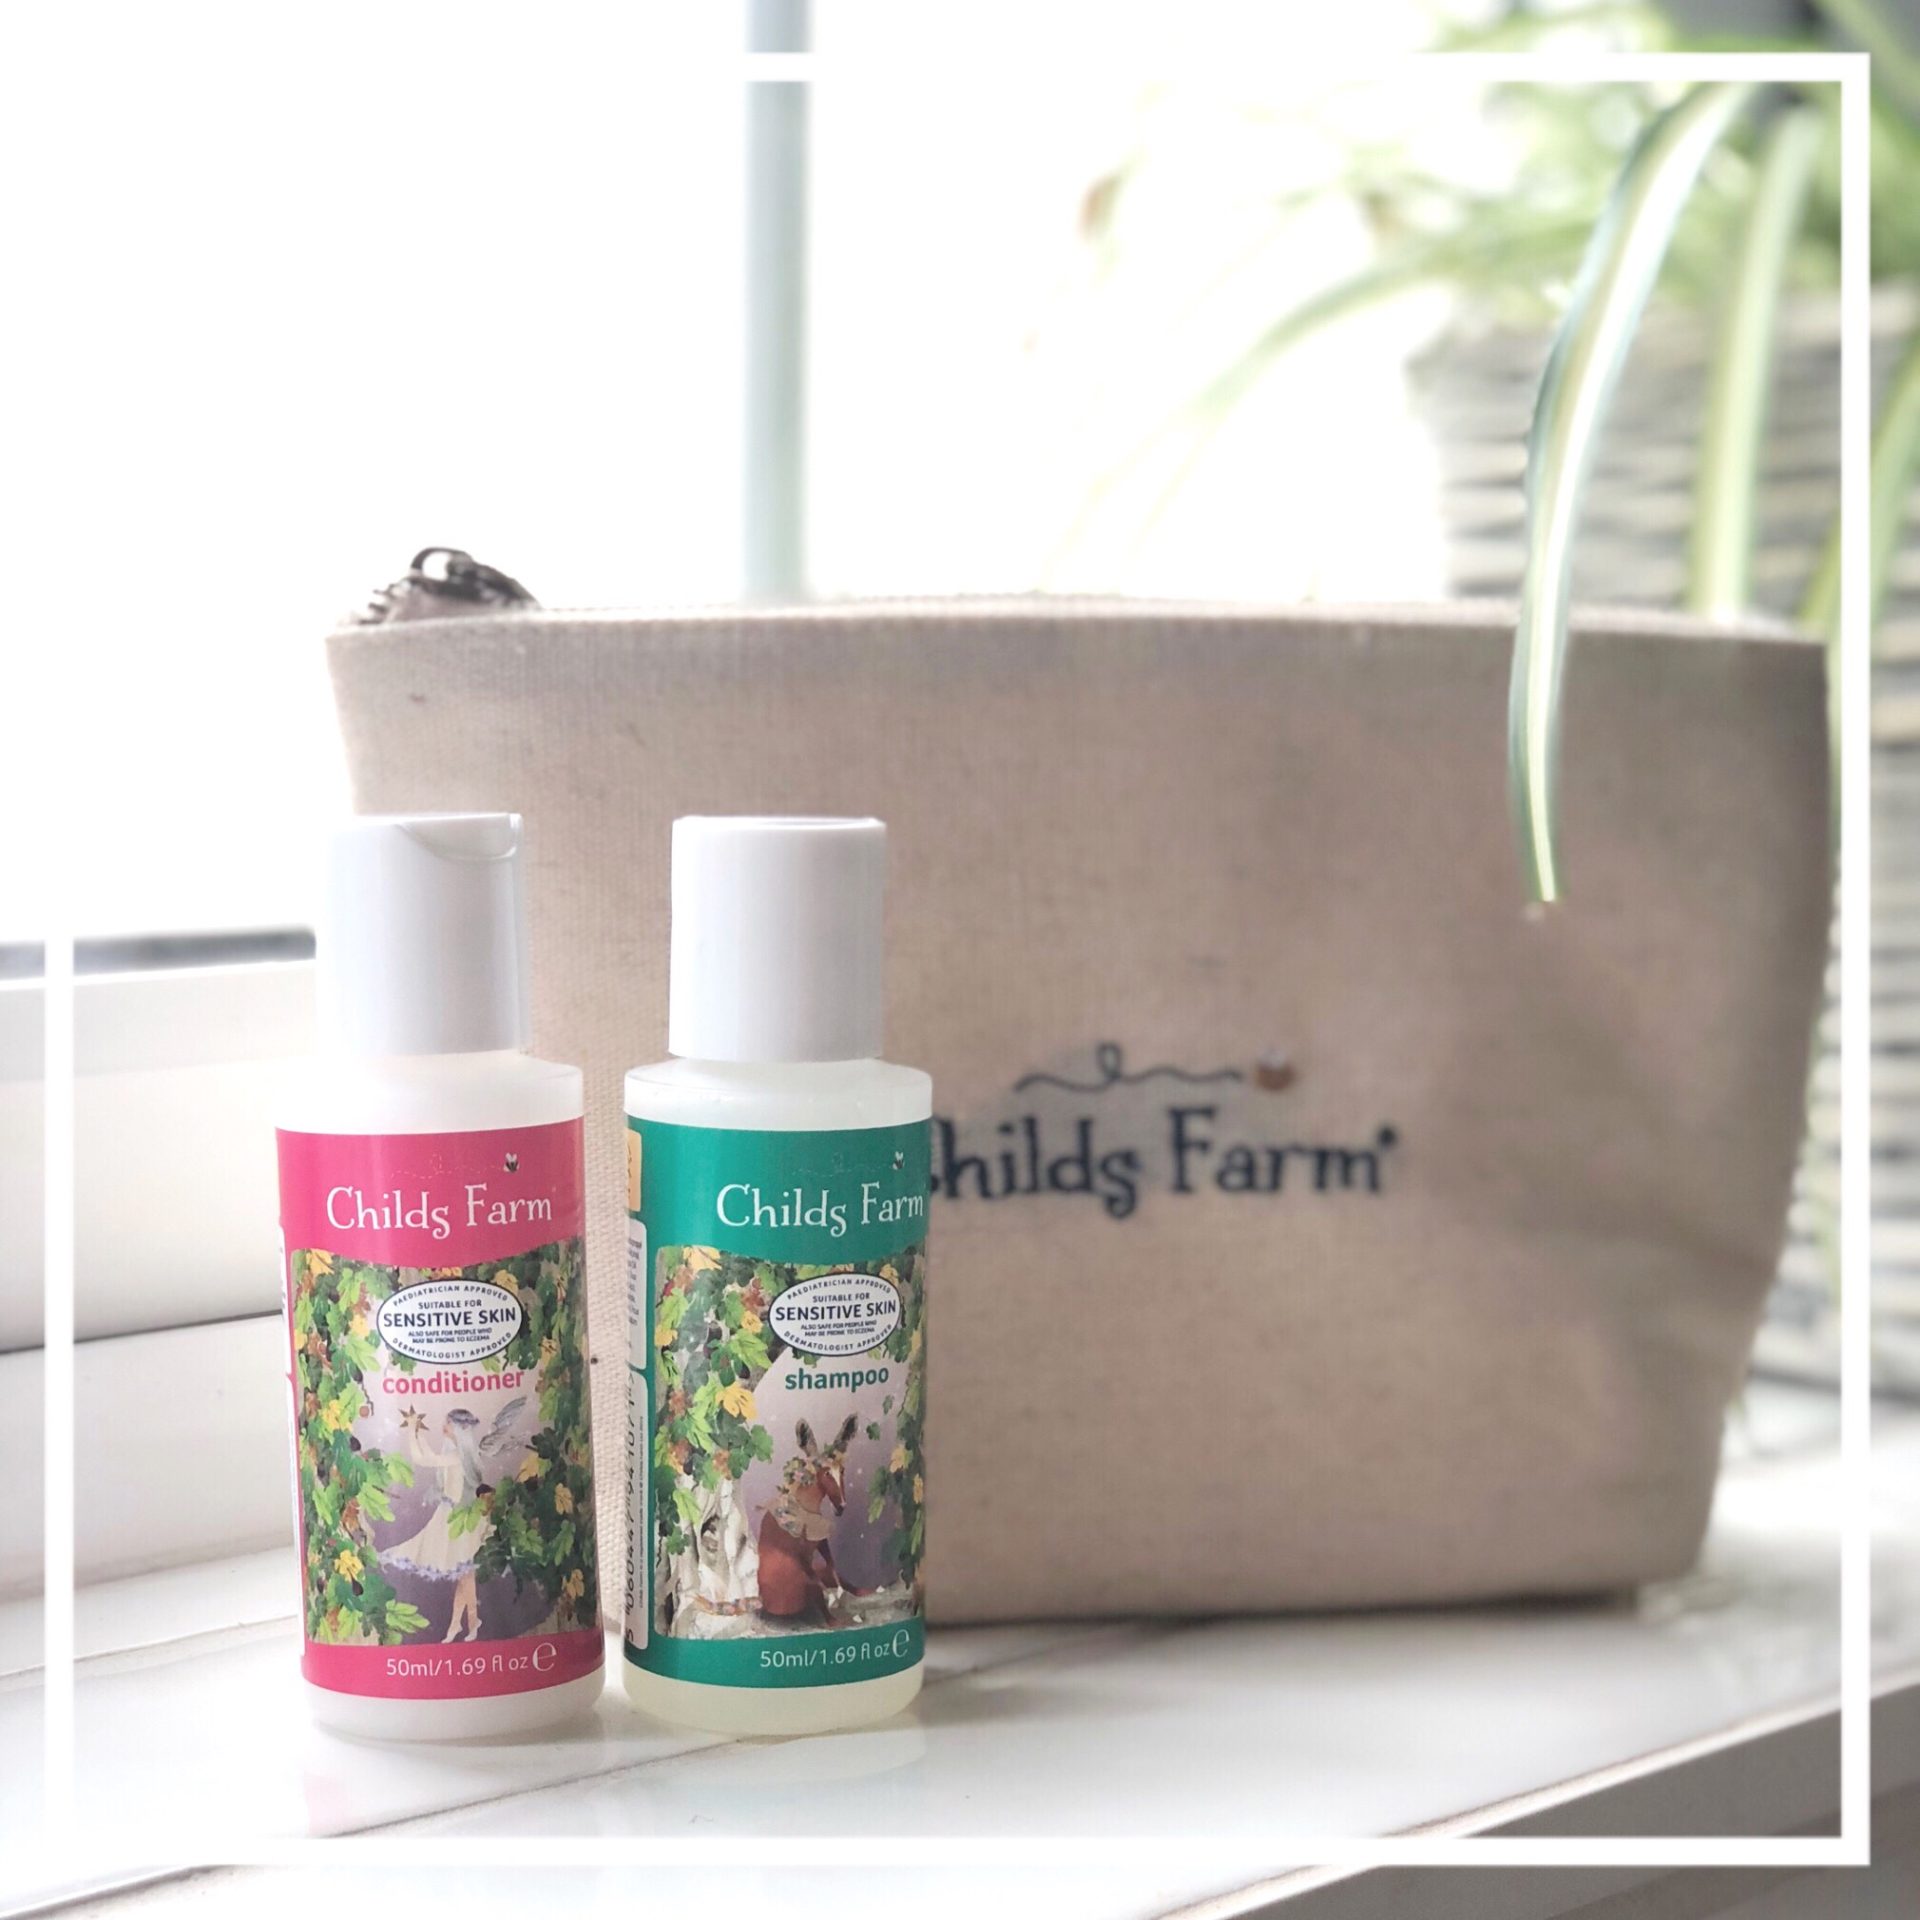 Product Review – Childs Farm organic fig shampoo and conditioner